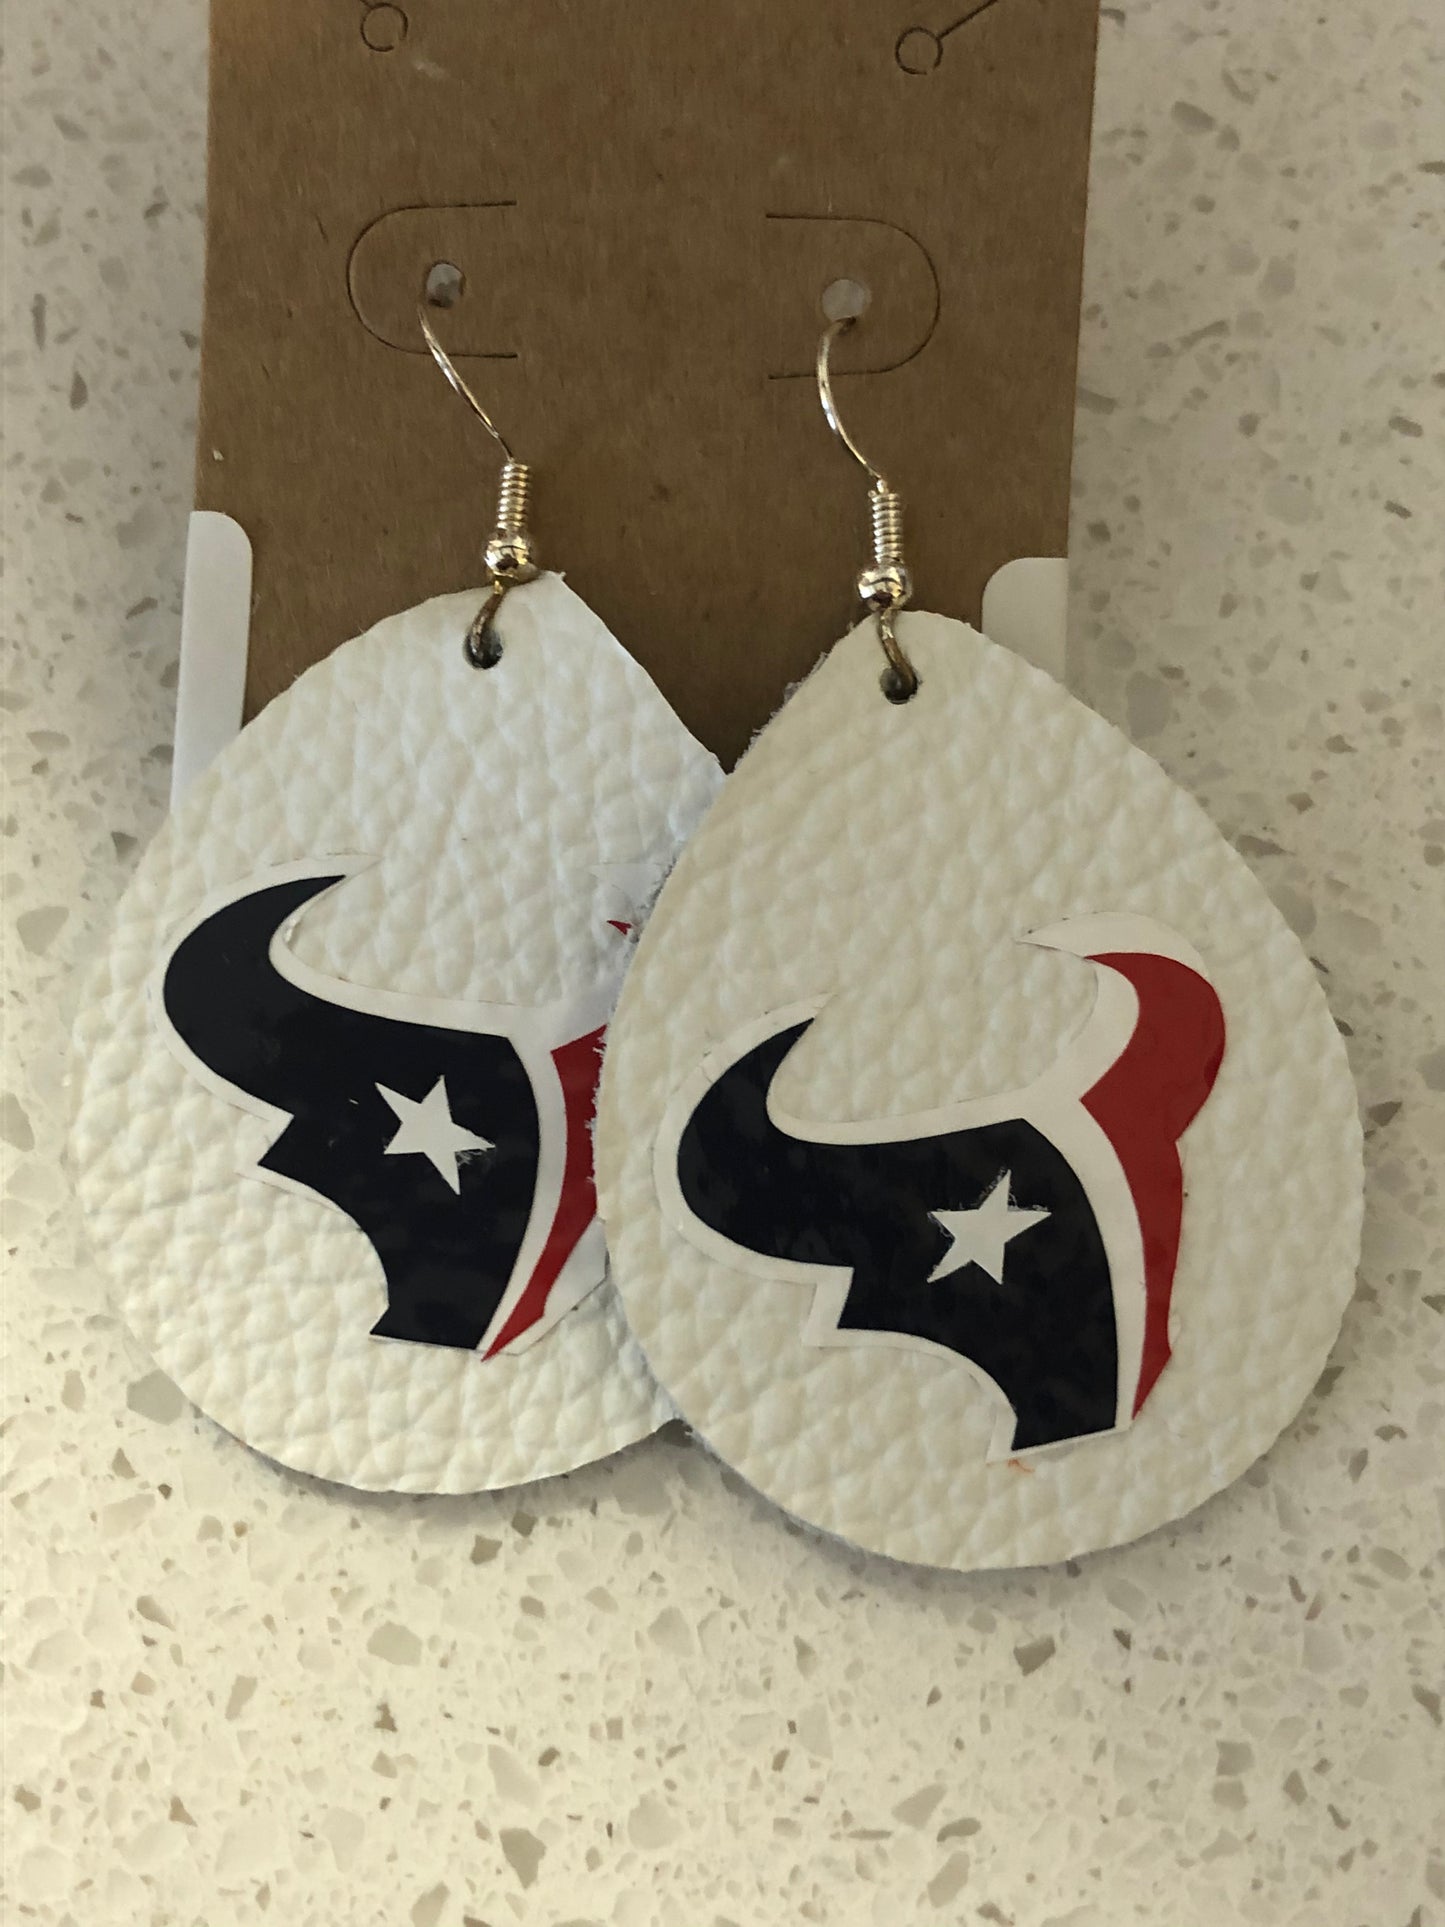 Tear drop shaped white leather earrings with Houston Texans logo